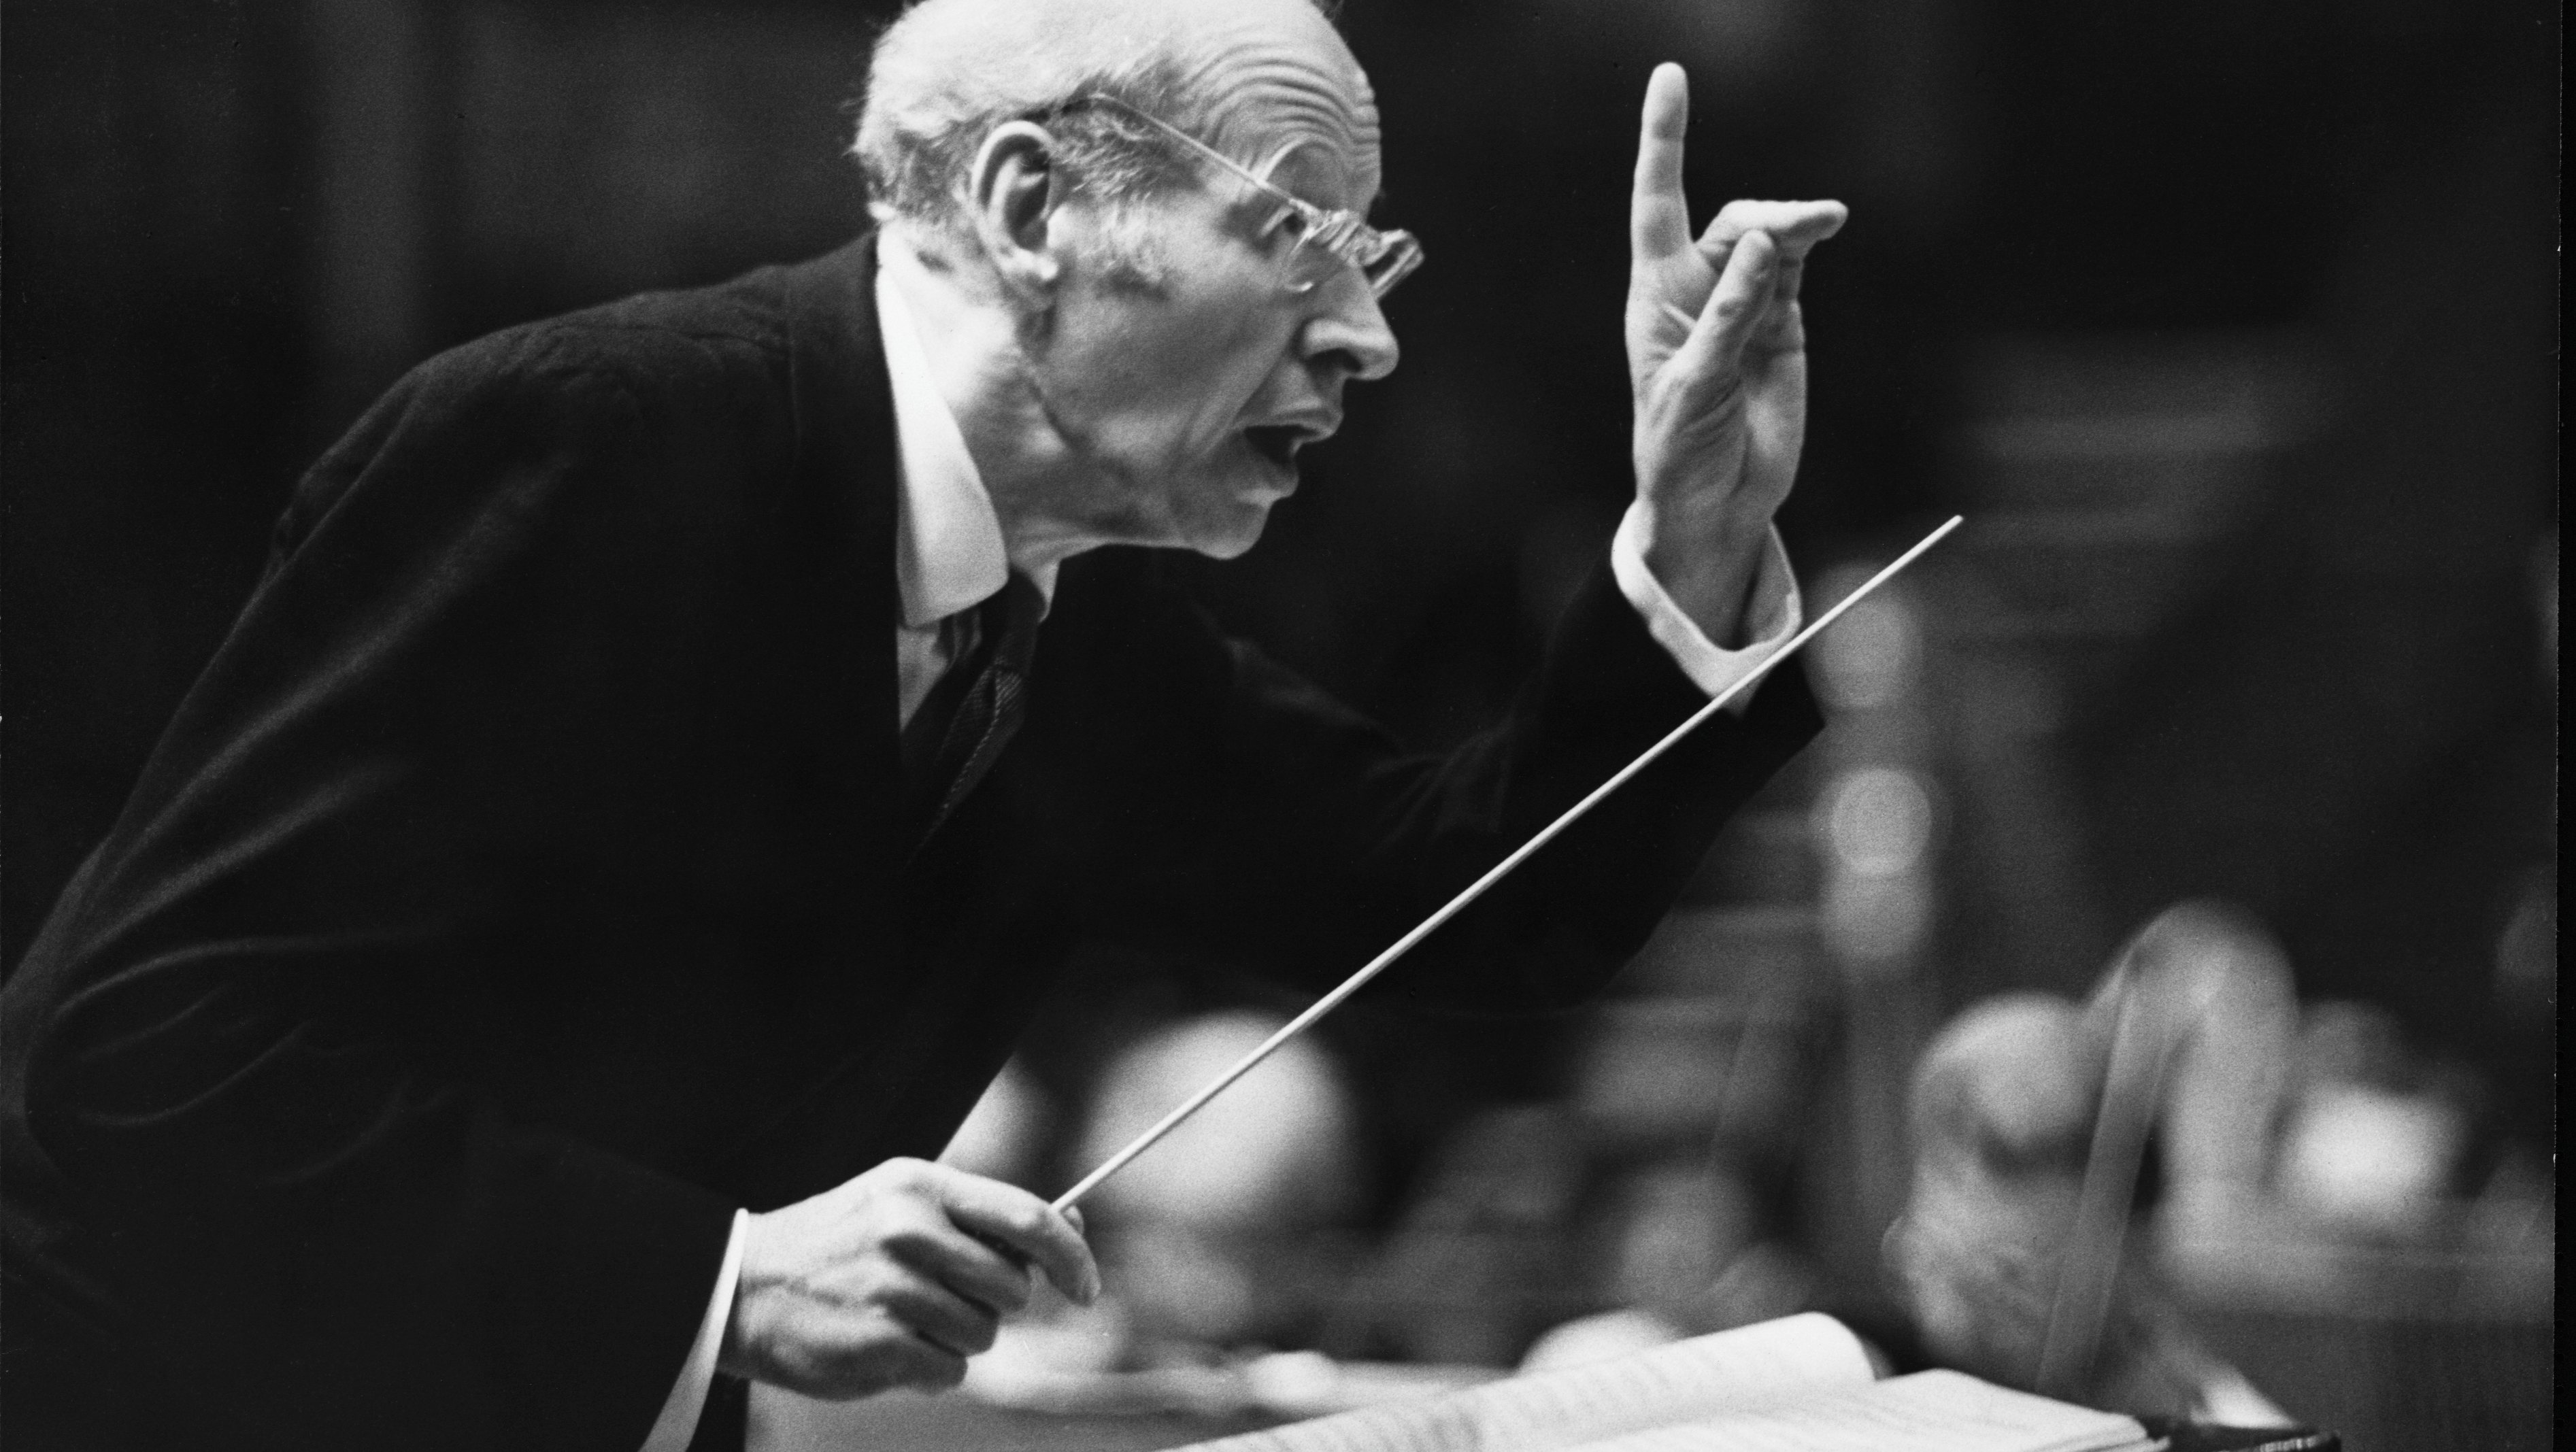 Conductor and Composer Eugene Goossens